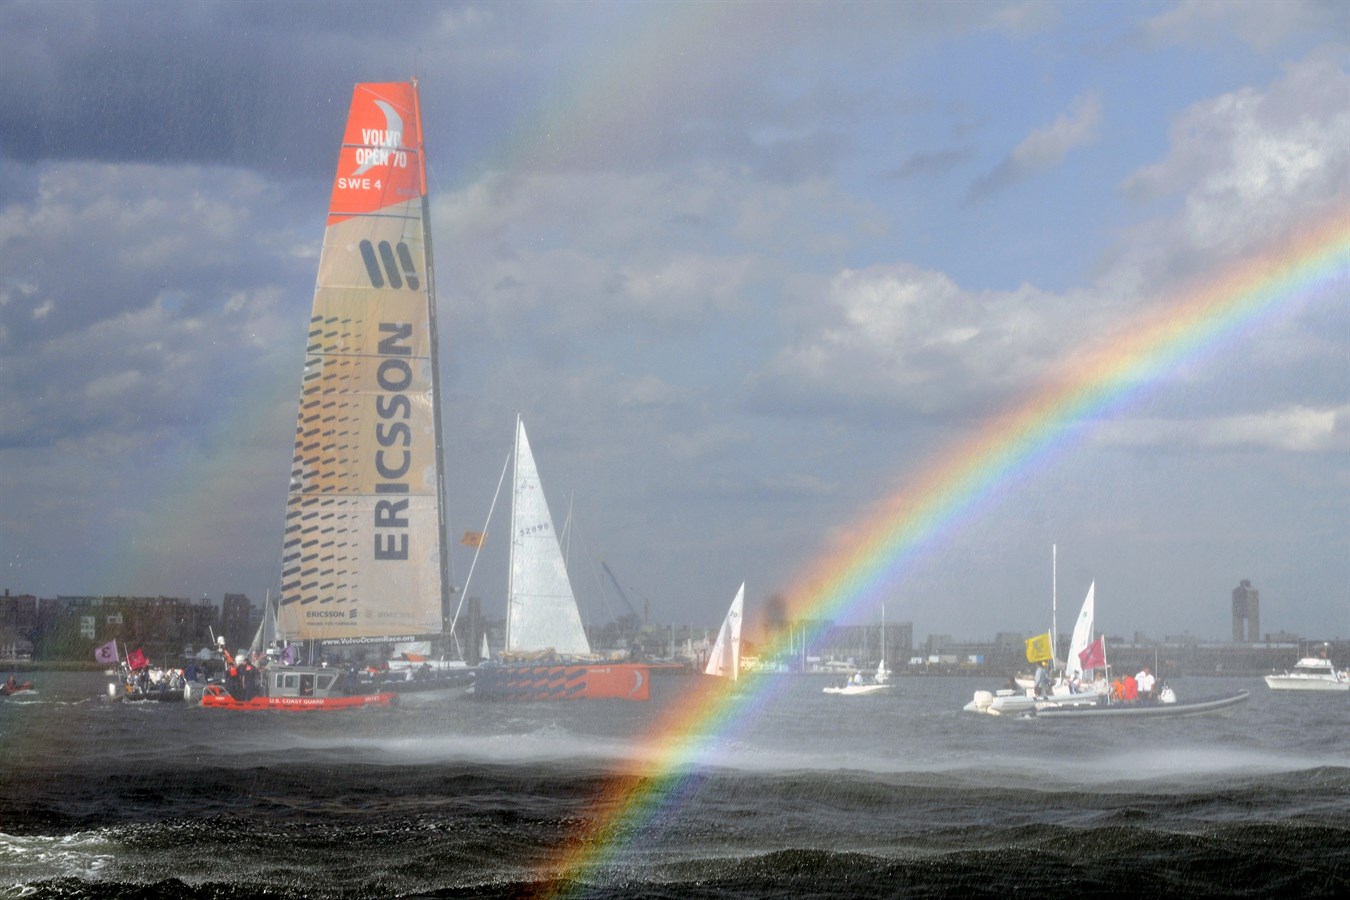 Ericsson 4, skippered by Torben Grael (BRA) (pictured) finish first on leg 6 of the Volvo Ocean Race, from Rio de Janeiro to Boston